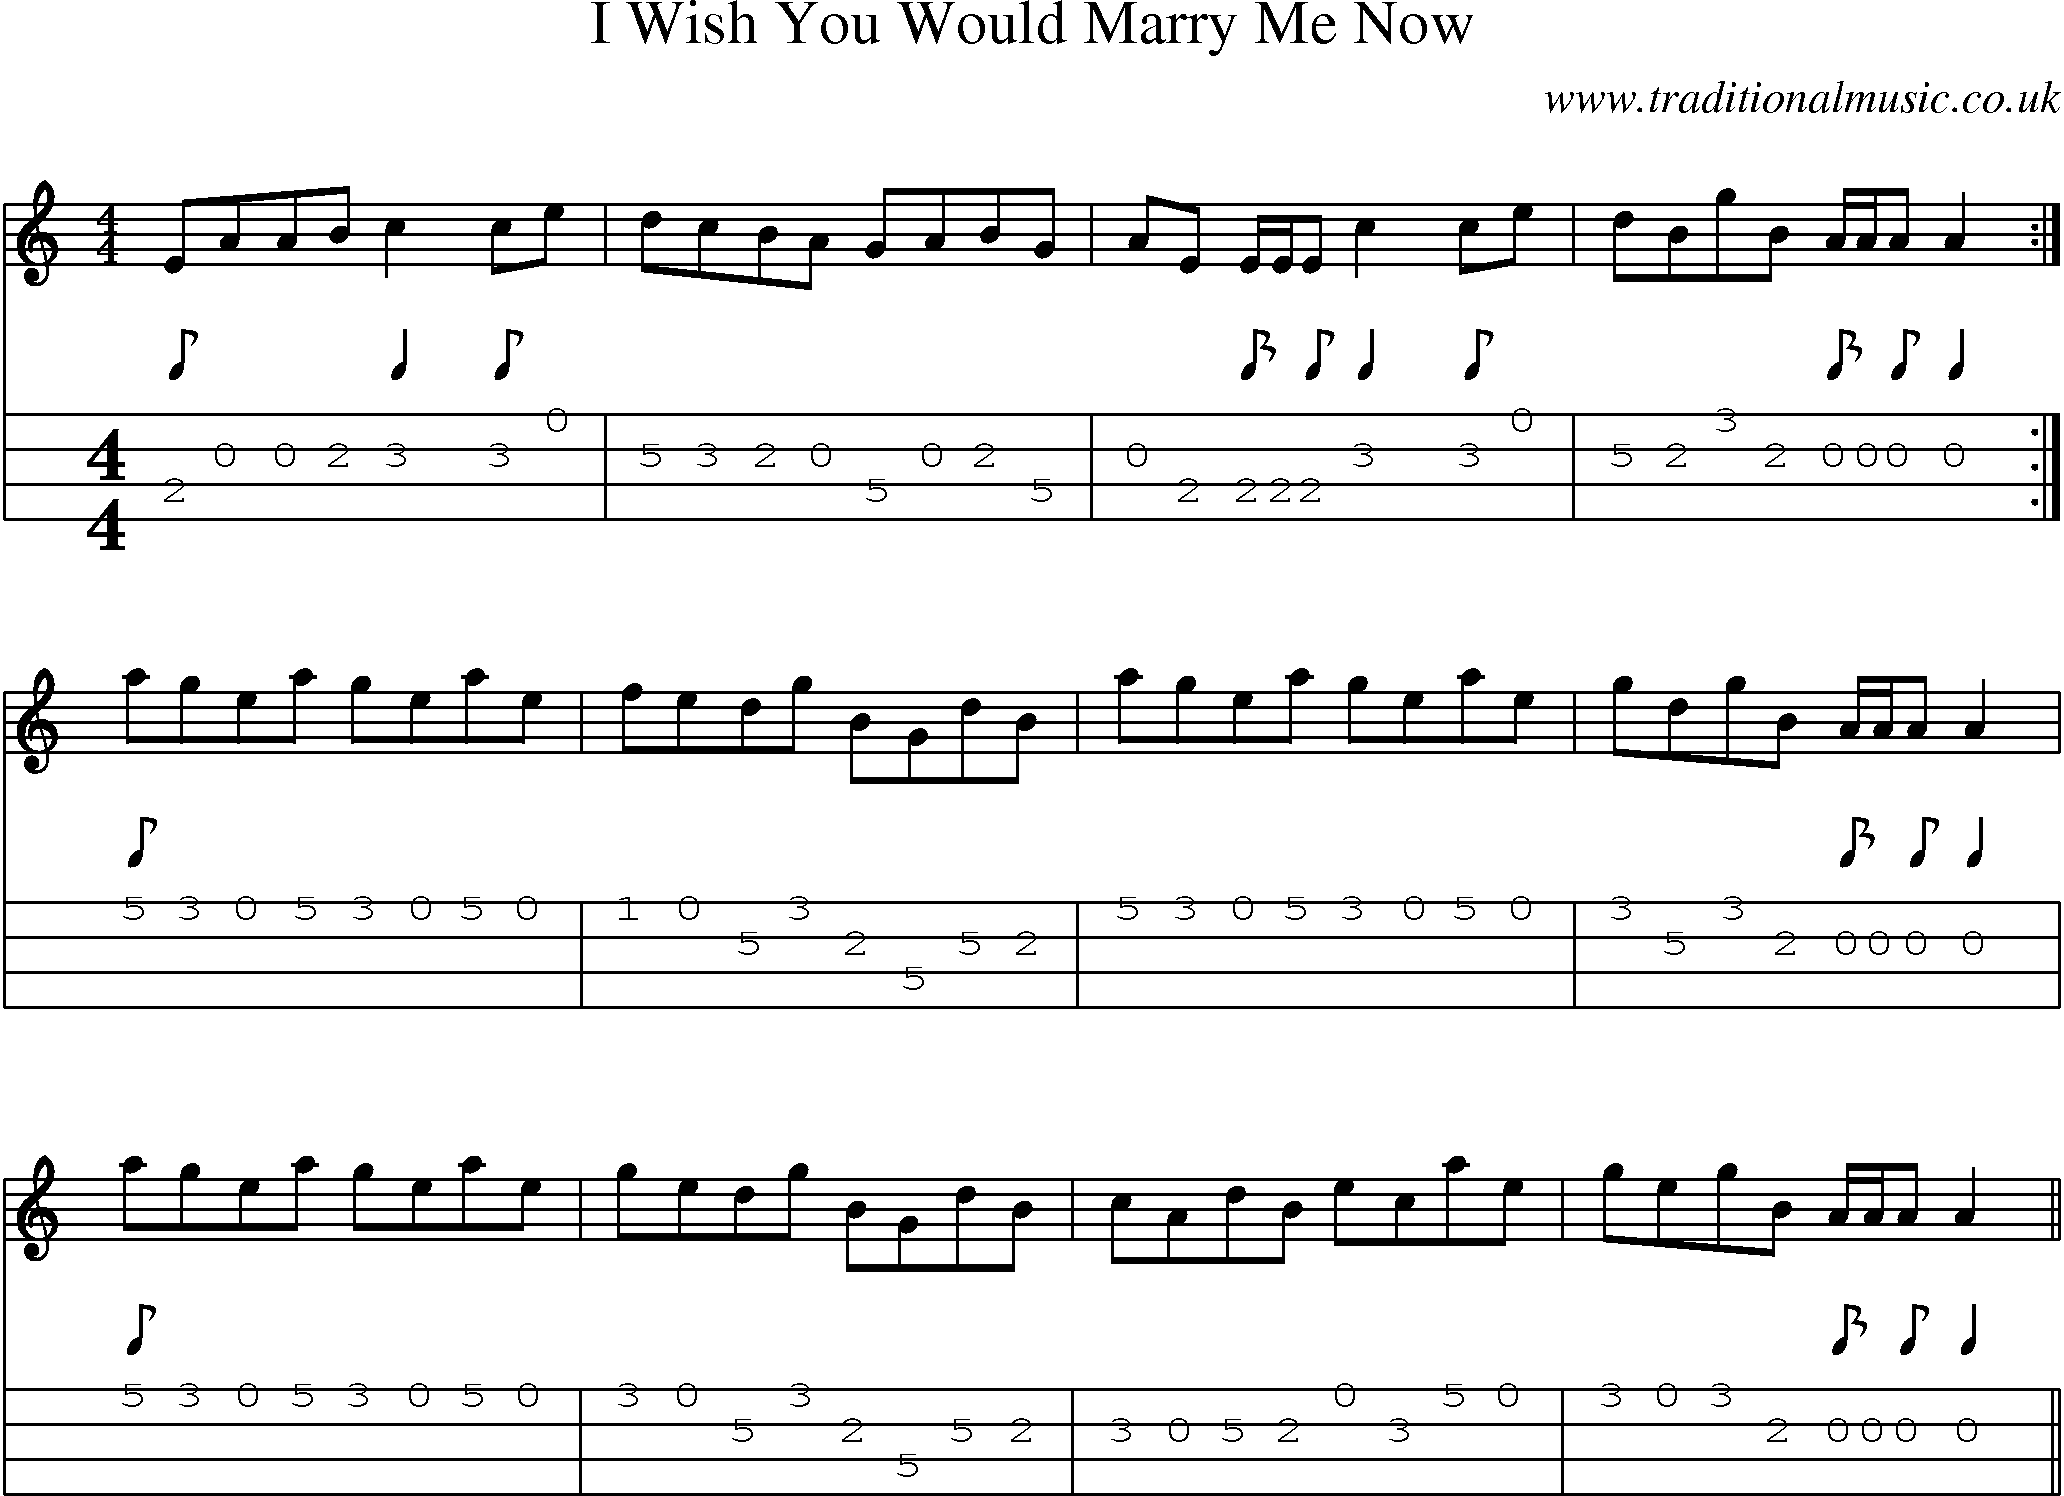 Music Score and Mandolin Tabs for I Wish You Would Marry Me Now